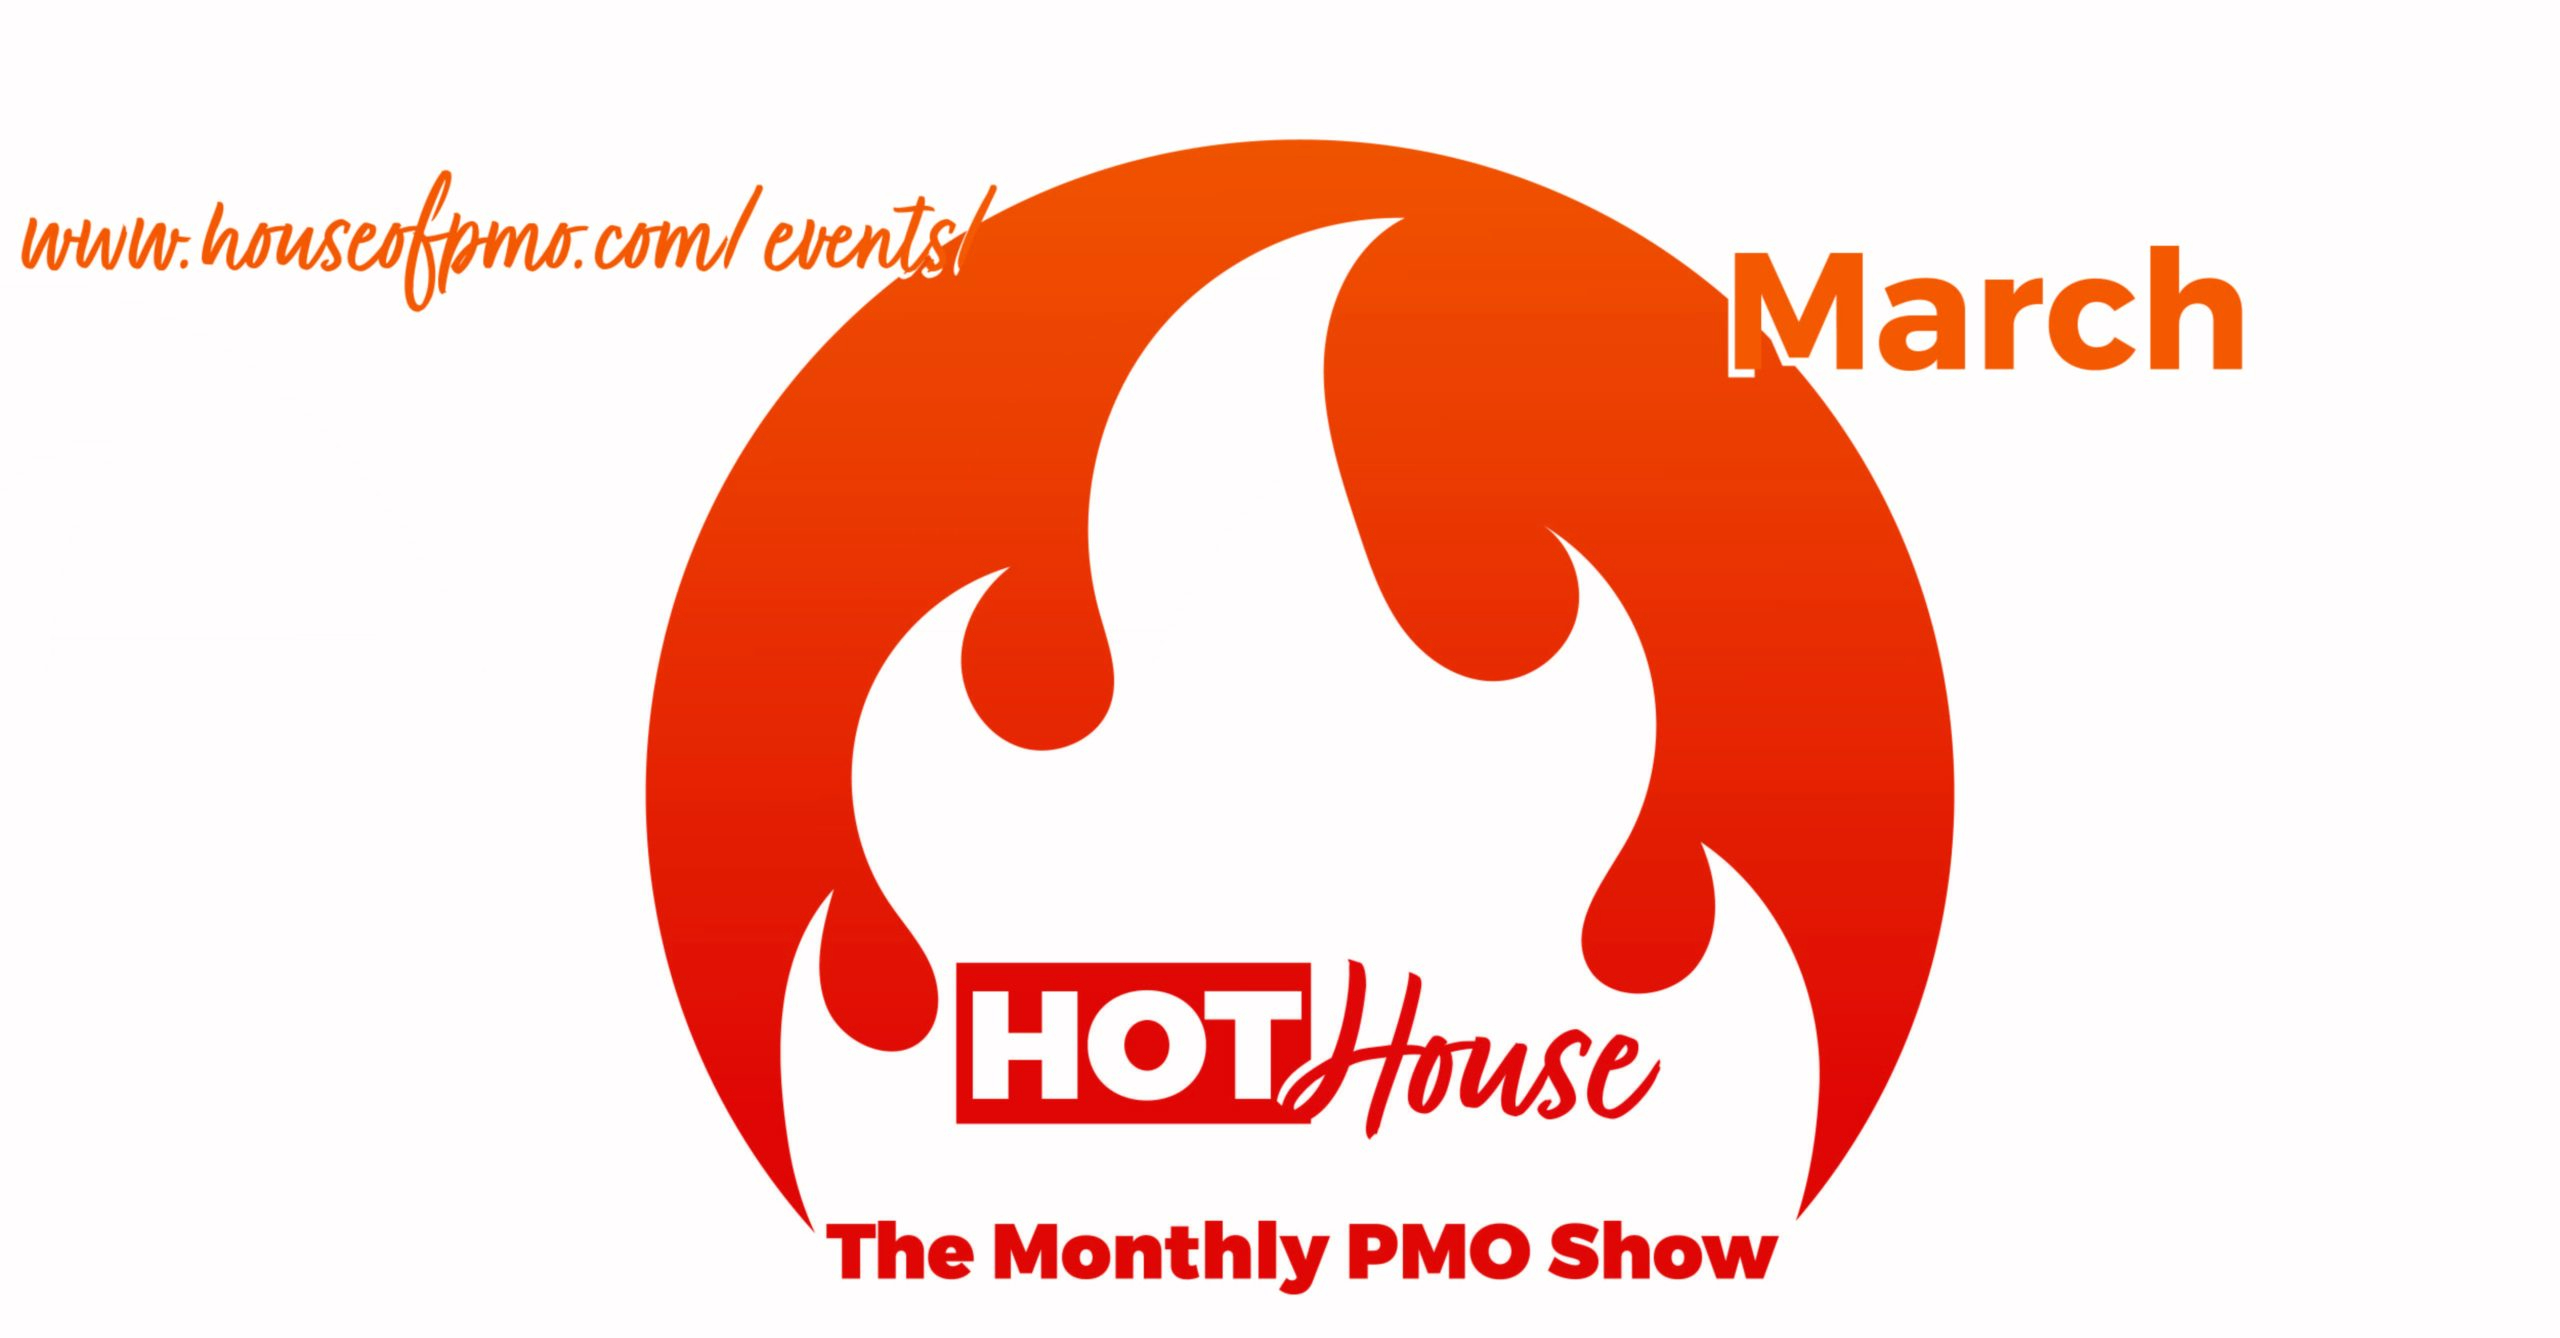 image for the march pmo hot house event